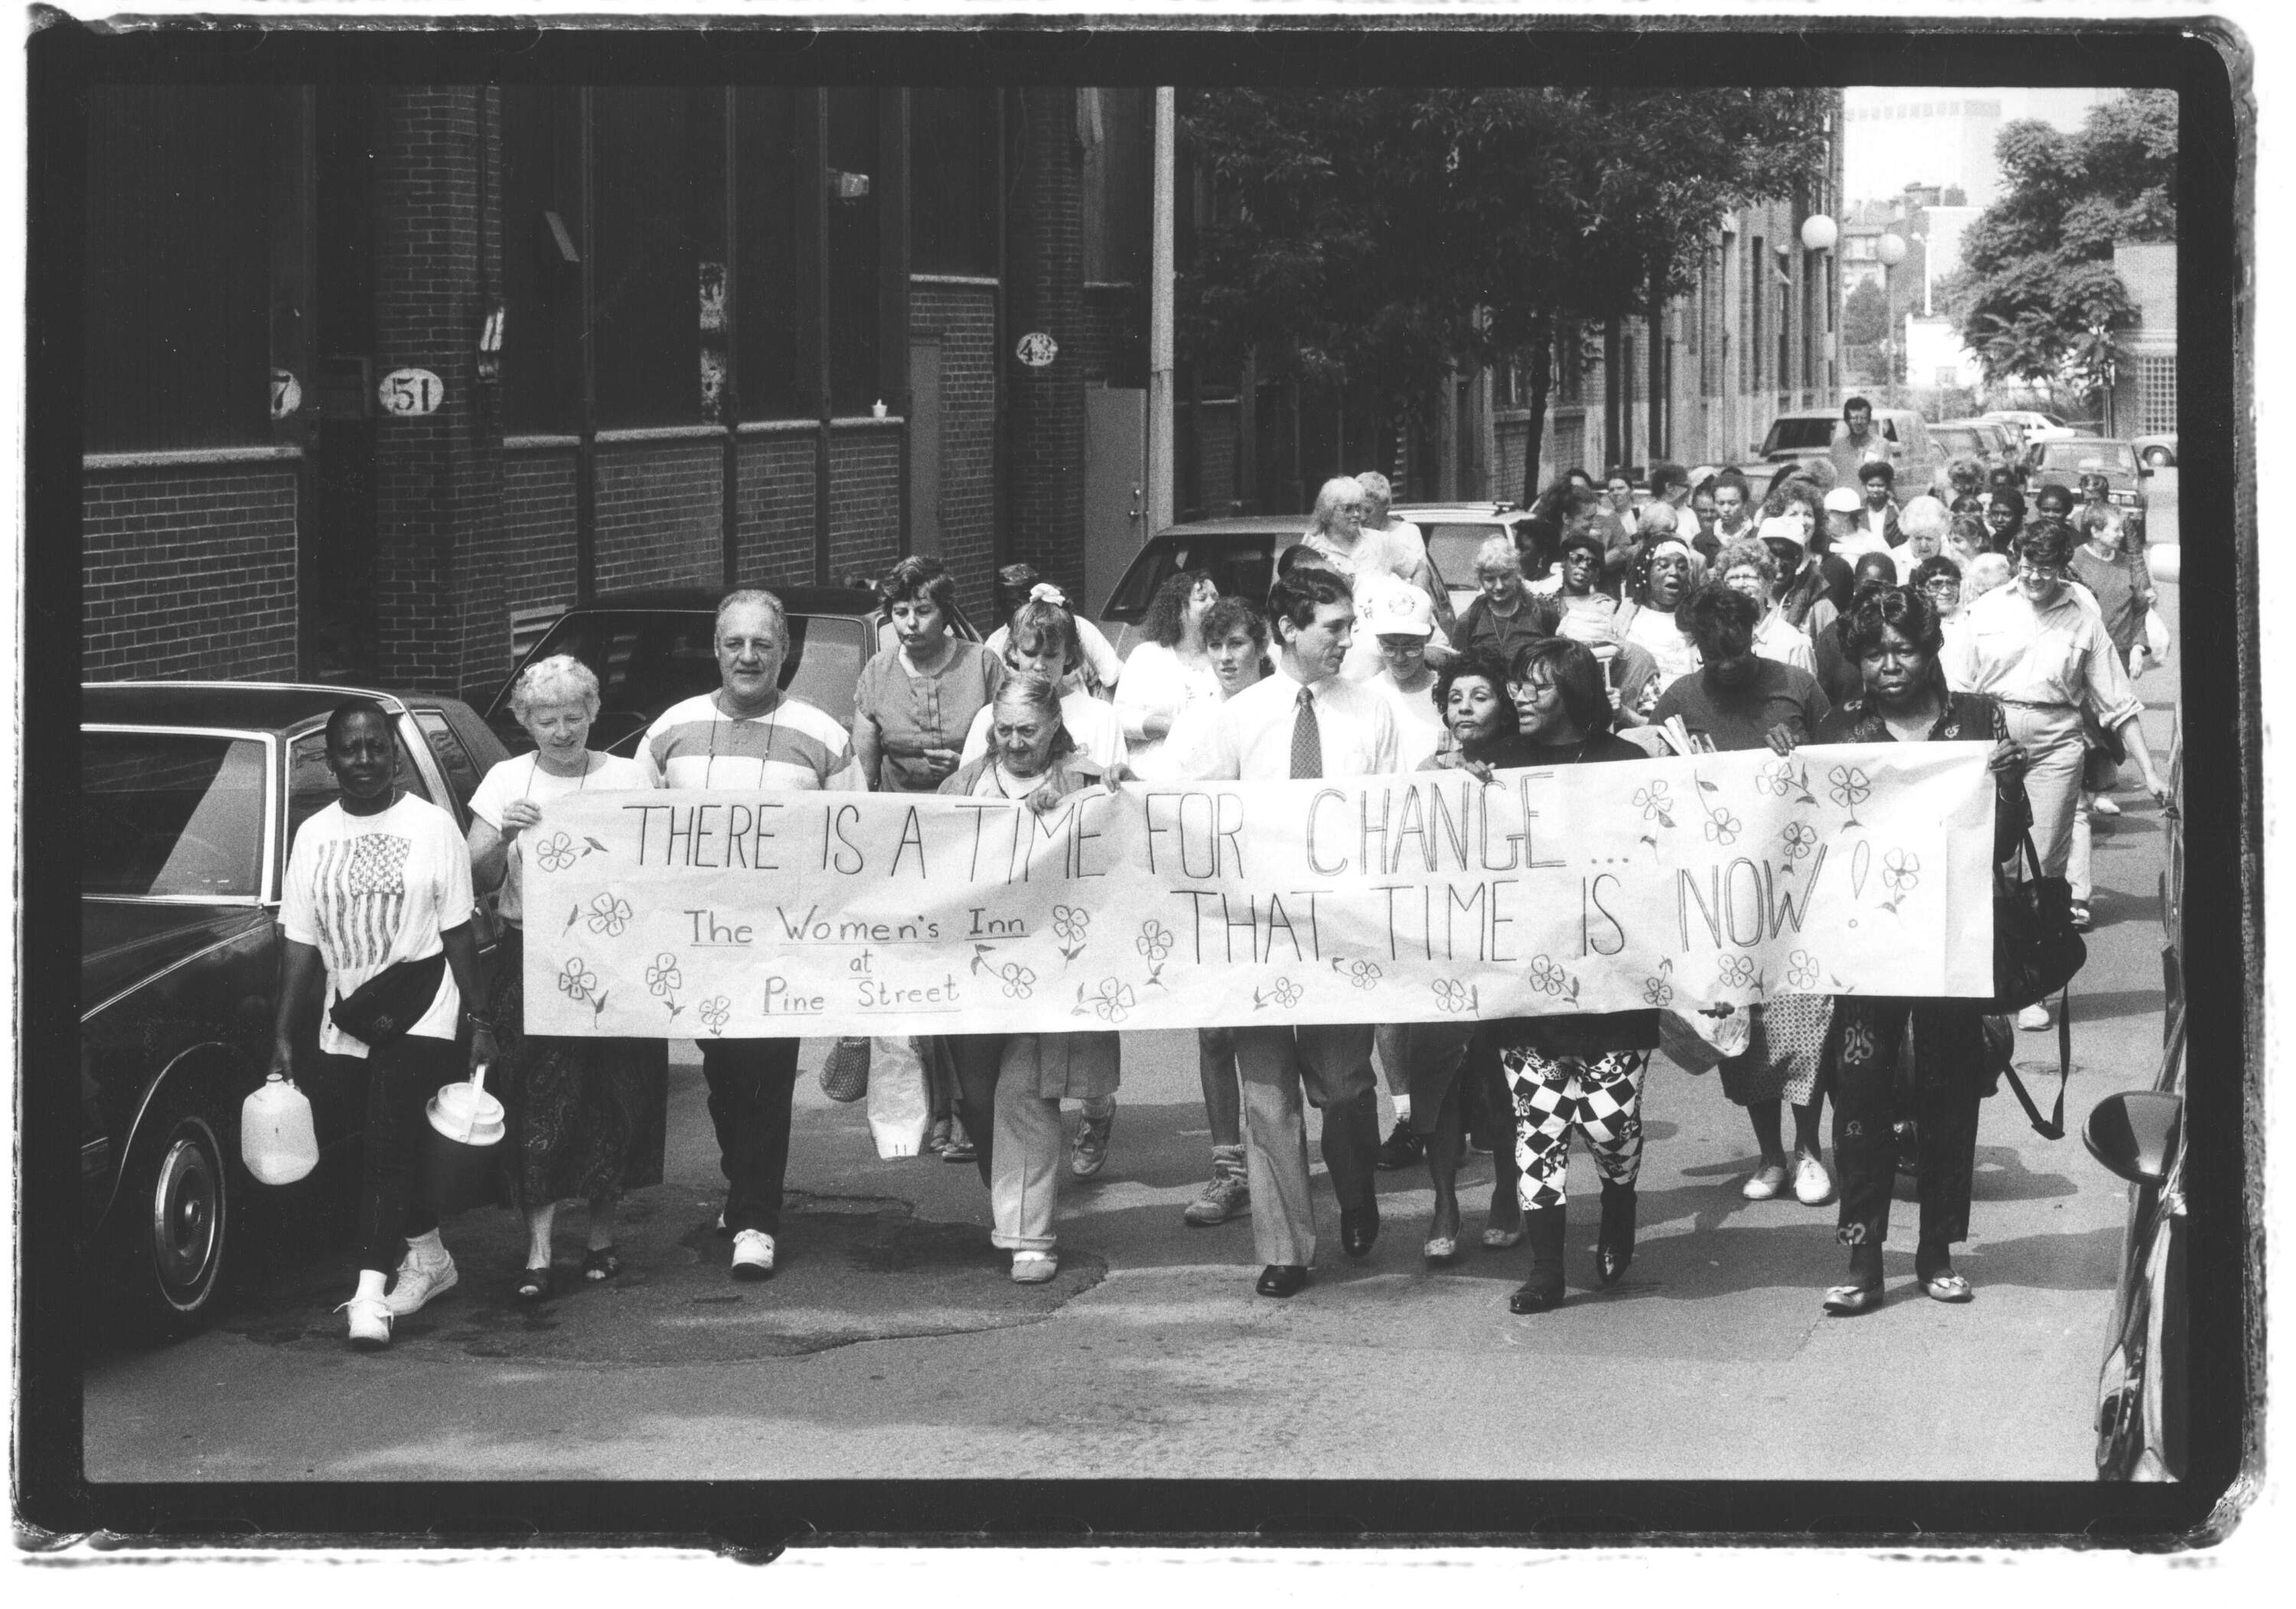 Sandra Jones-Hansen stands second from the right (in checkered pants) holding a sign during a march held ahead of the opening of the Pine Street women’s shelter in the early 1980s. (Photo courtesy of the Pine Street Inn)